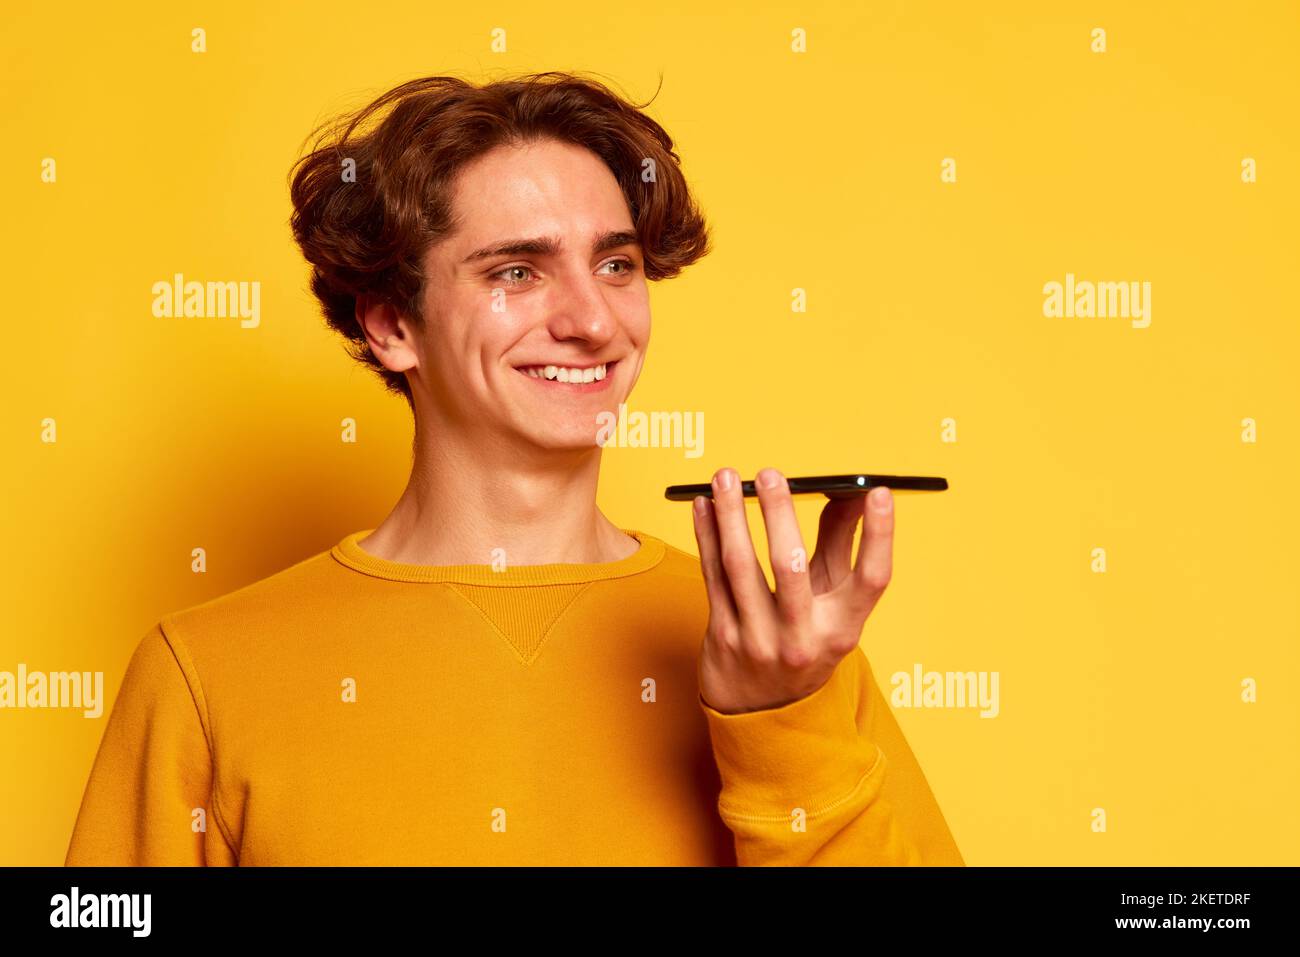 Portrait of young man with curly hair posing, recording voice message on phone isolated over yellow background Stock Photo